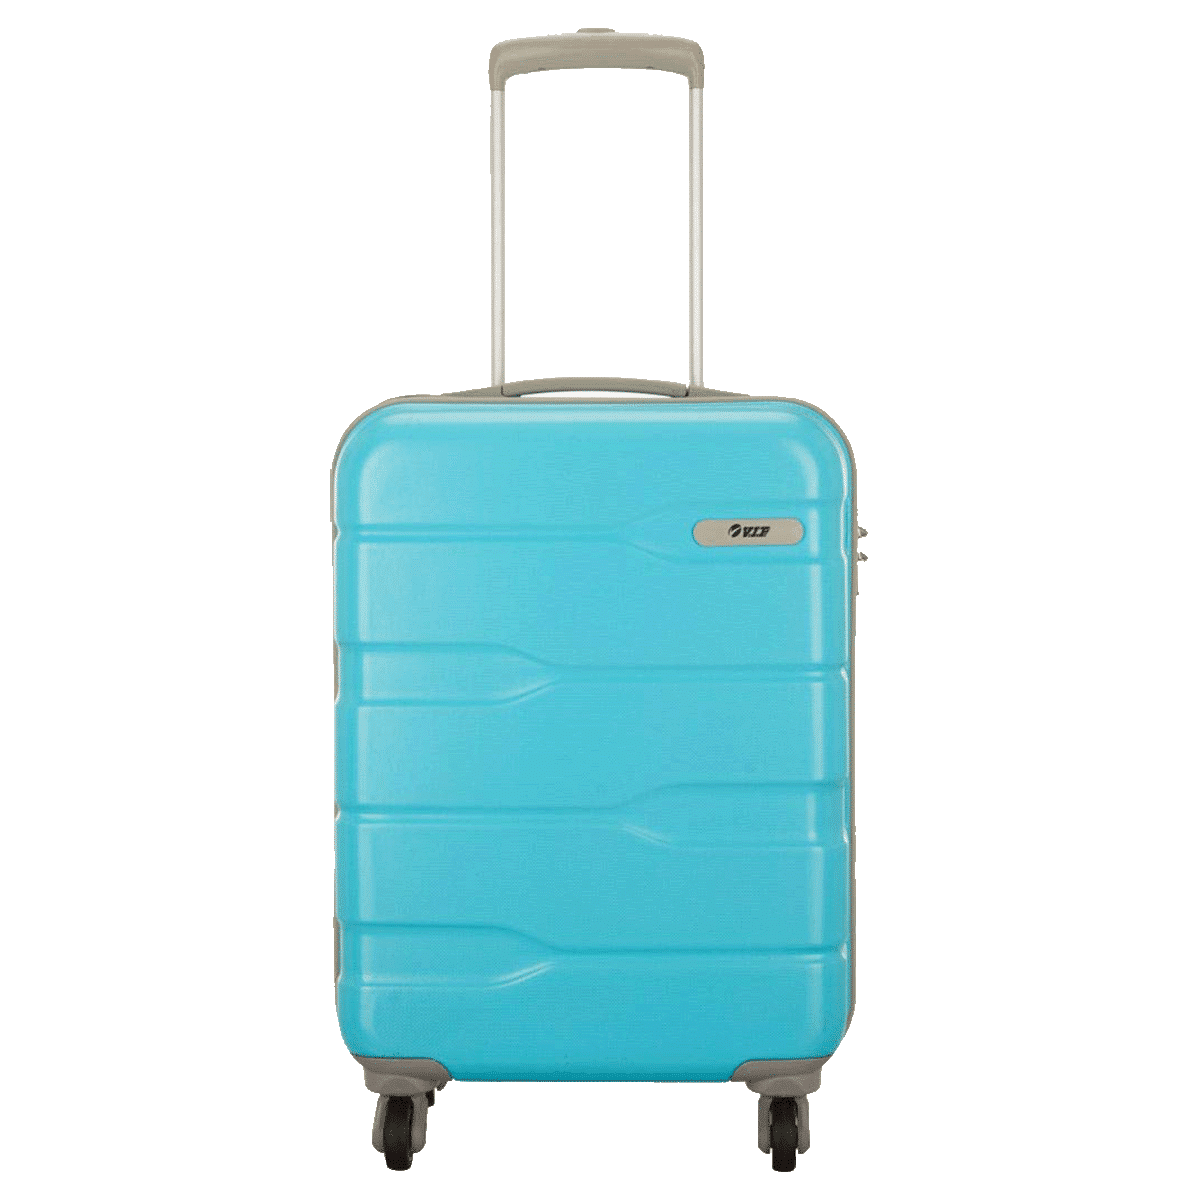 Update more than 77 vip trolley bag latest - in.cdgdbentre